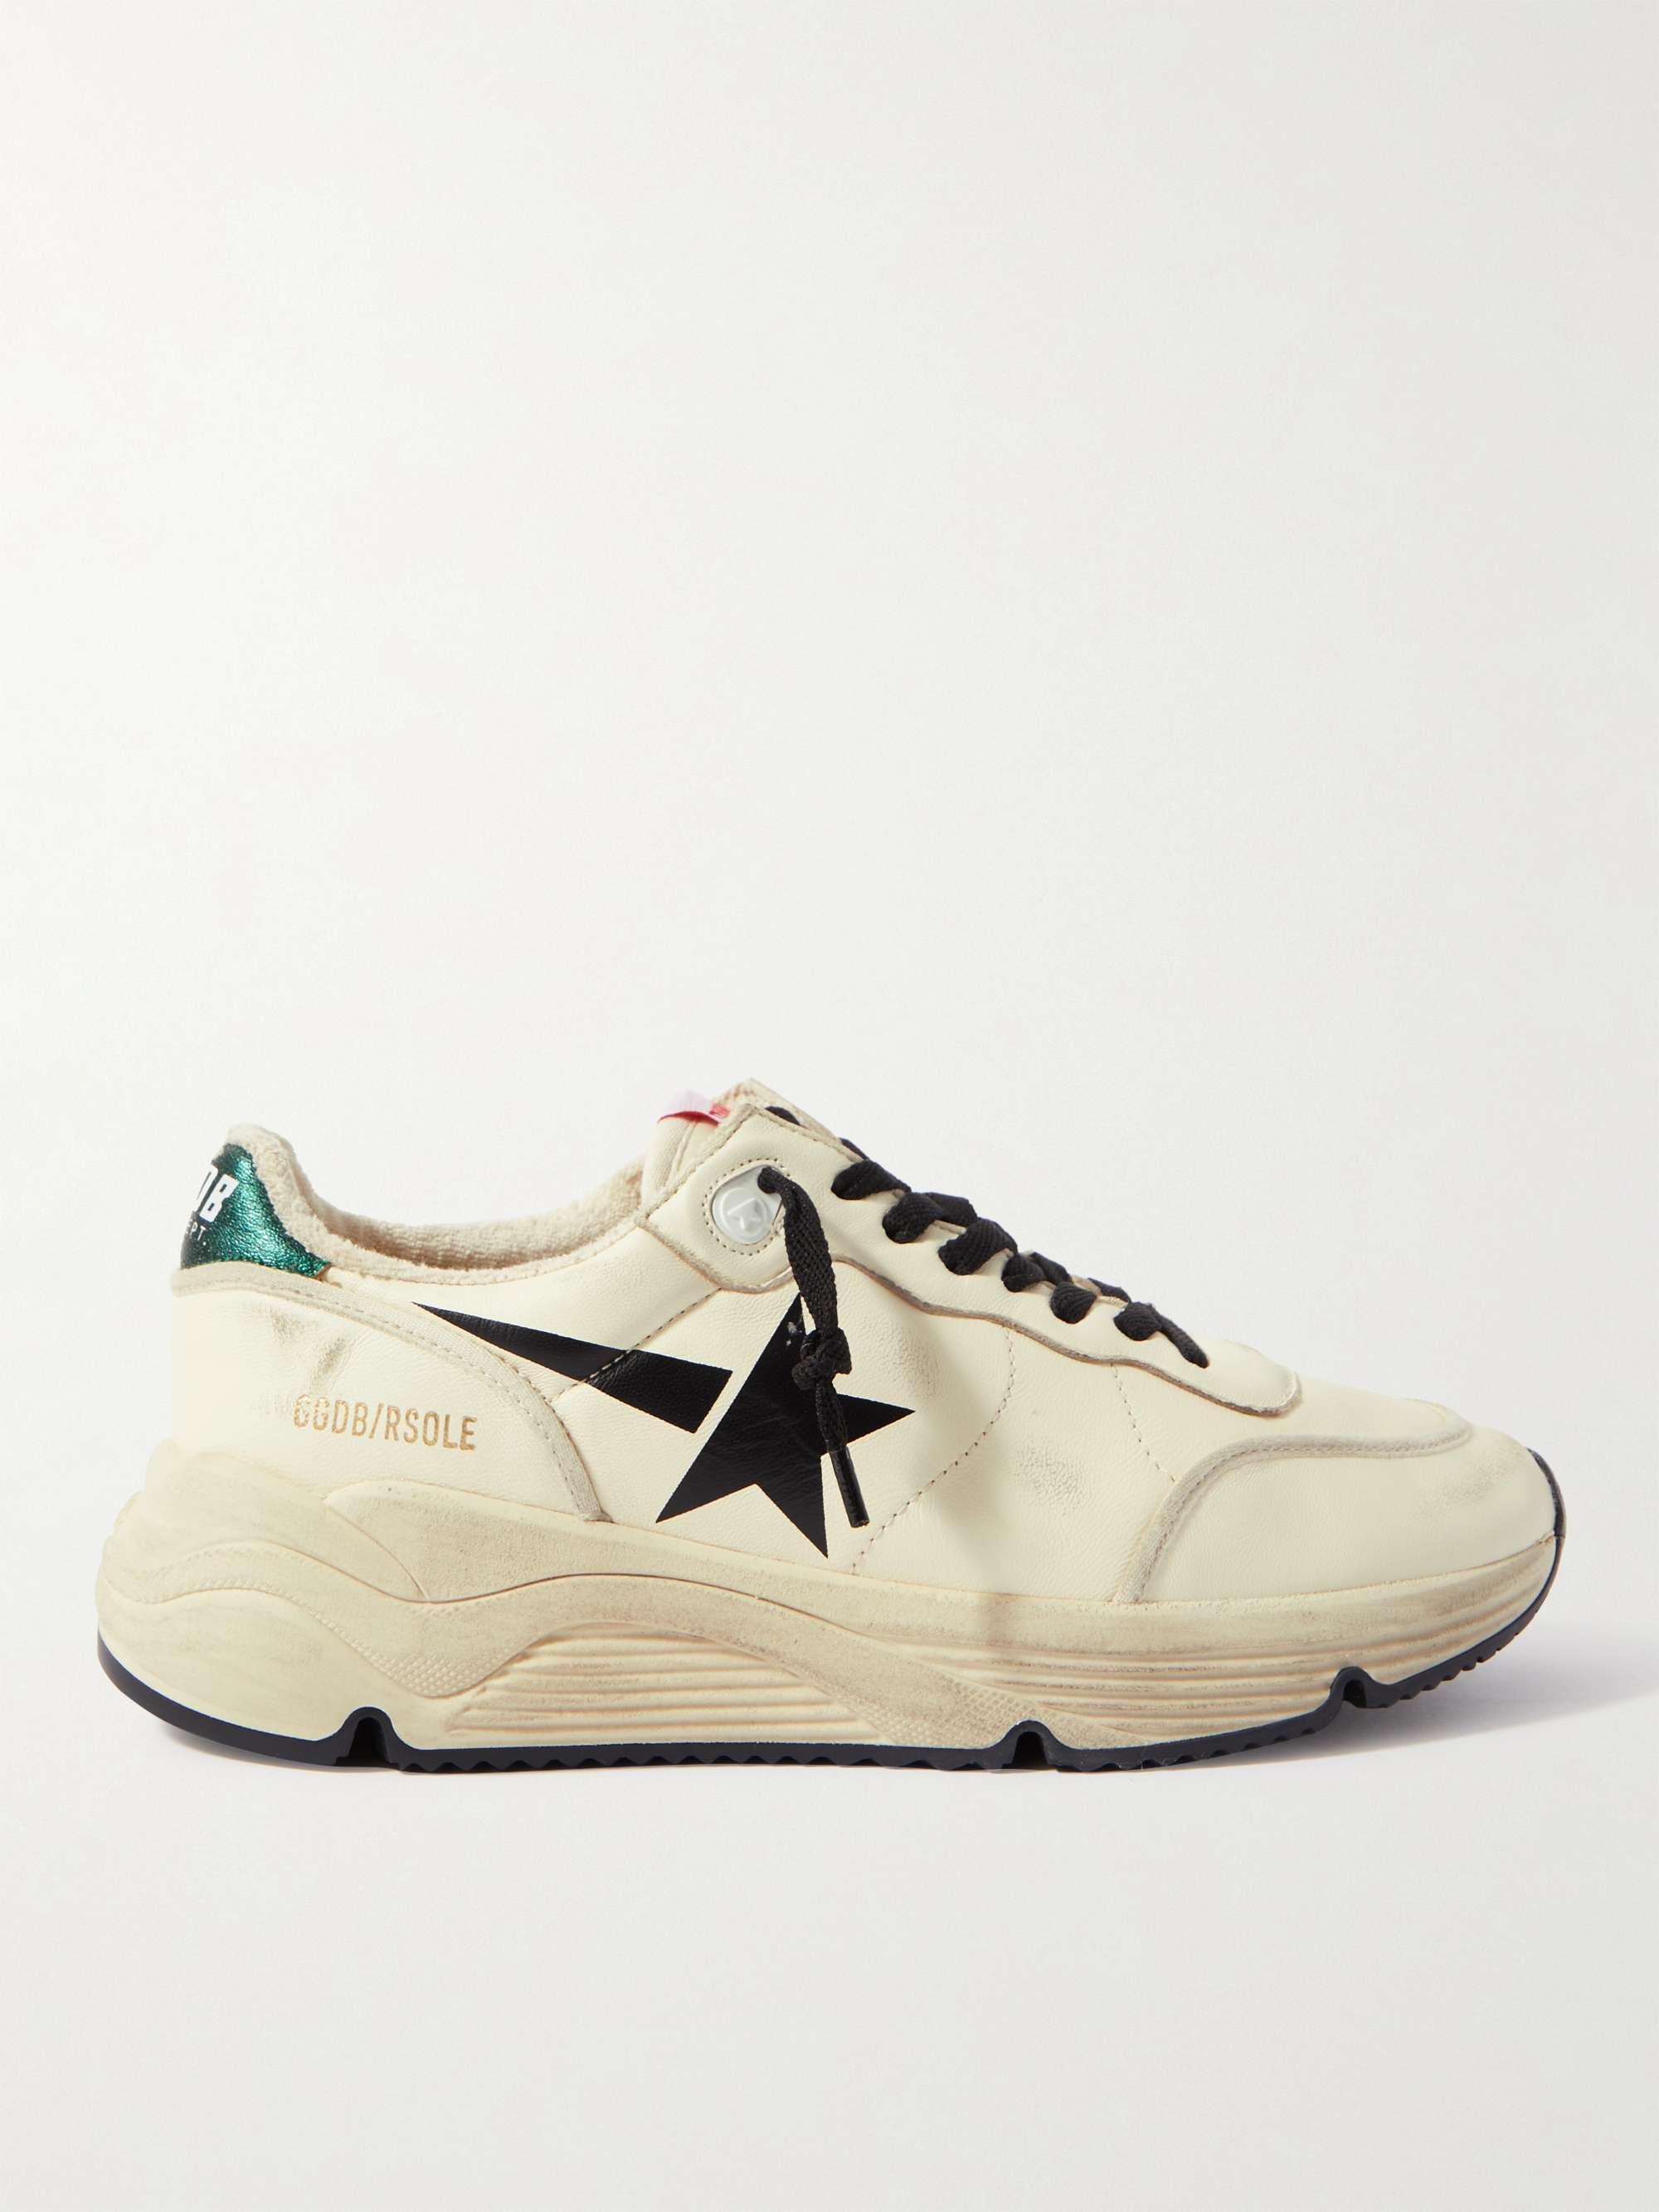 GOLDEN GOOSE Running Sole Distressed Leather Sneakers